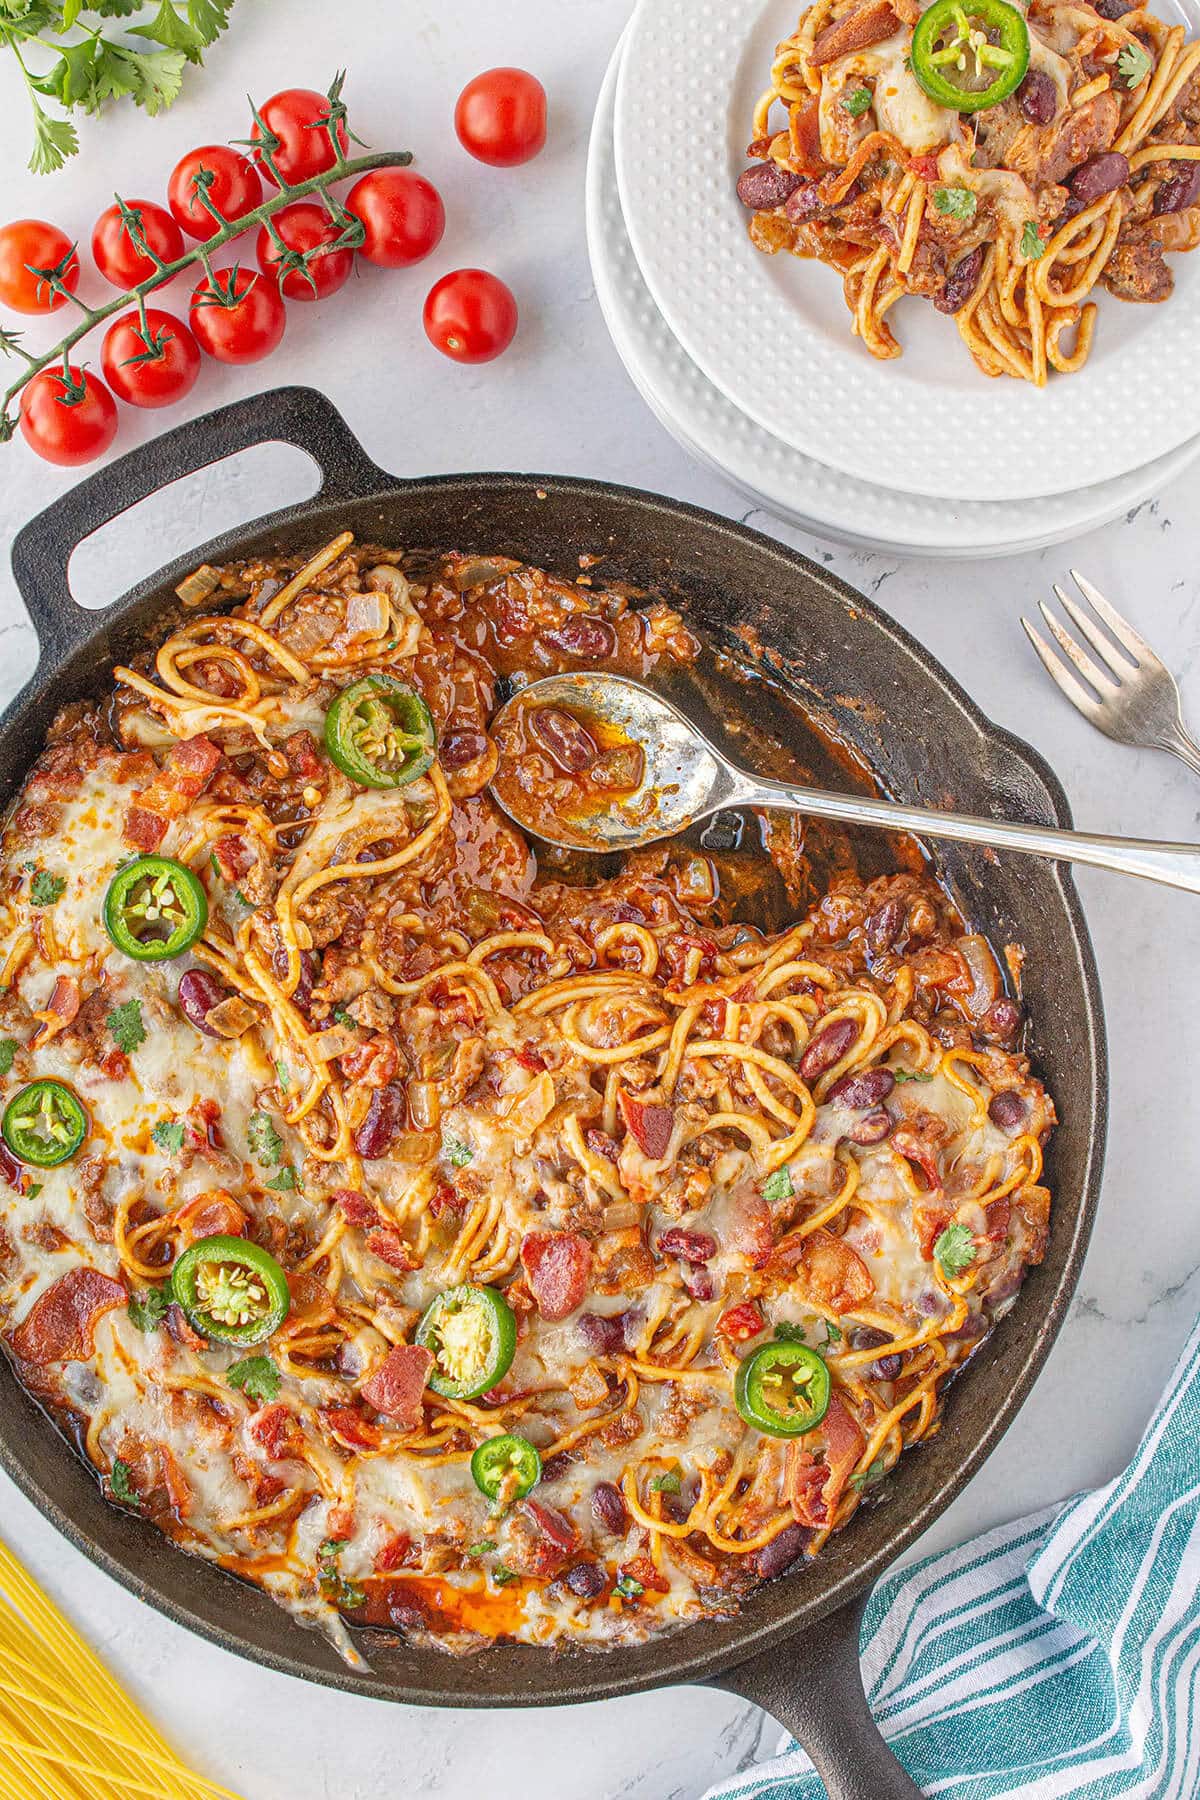 A cast iron skillet filled with chili spaghetti, with serving spoon.